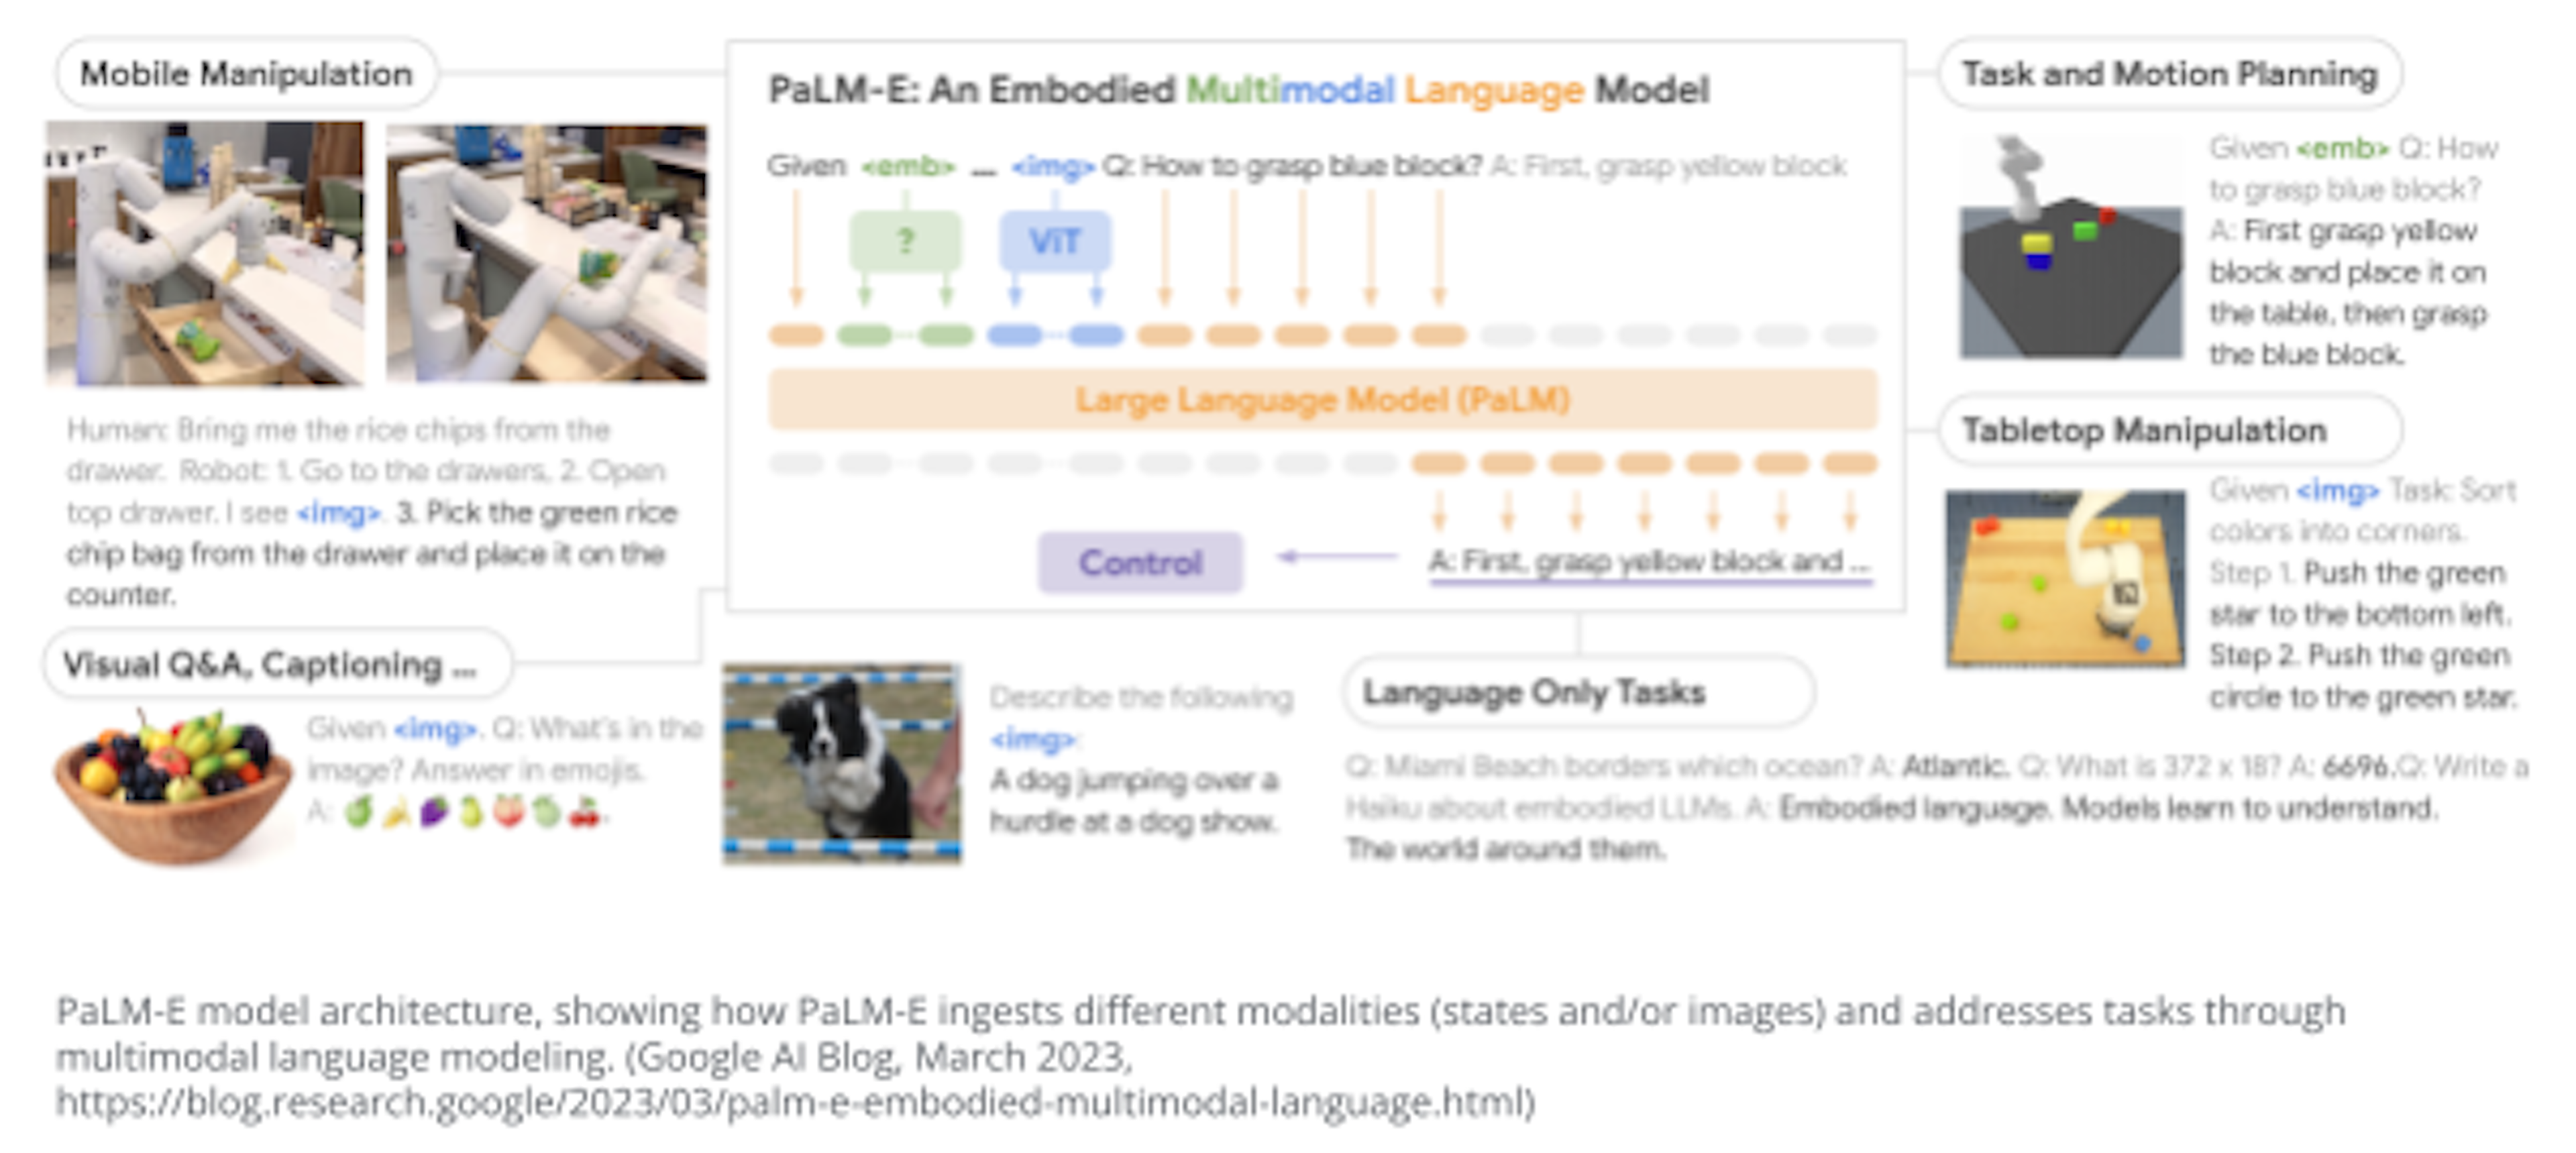 PaLM-E model architecture, showing how PaLM-E ingests different modalities (states and/or images) and addresses tasks through multimodal language modeling. (Google AI Blog, March 2023, https://blog.research.google/2023/03/palm-e-embodied-multimodal-language.html)